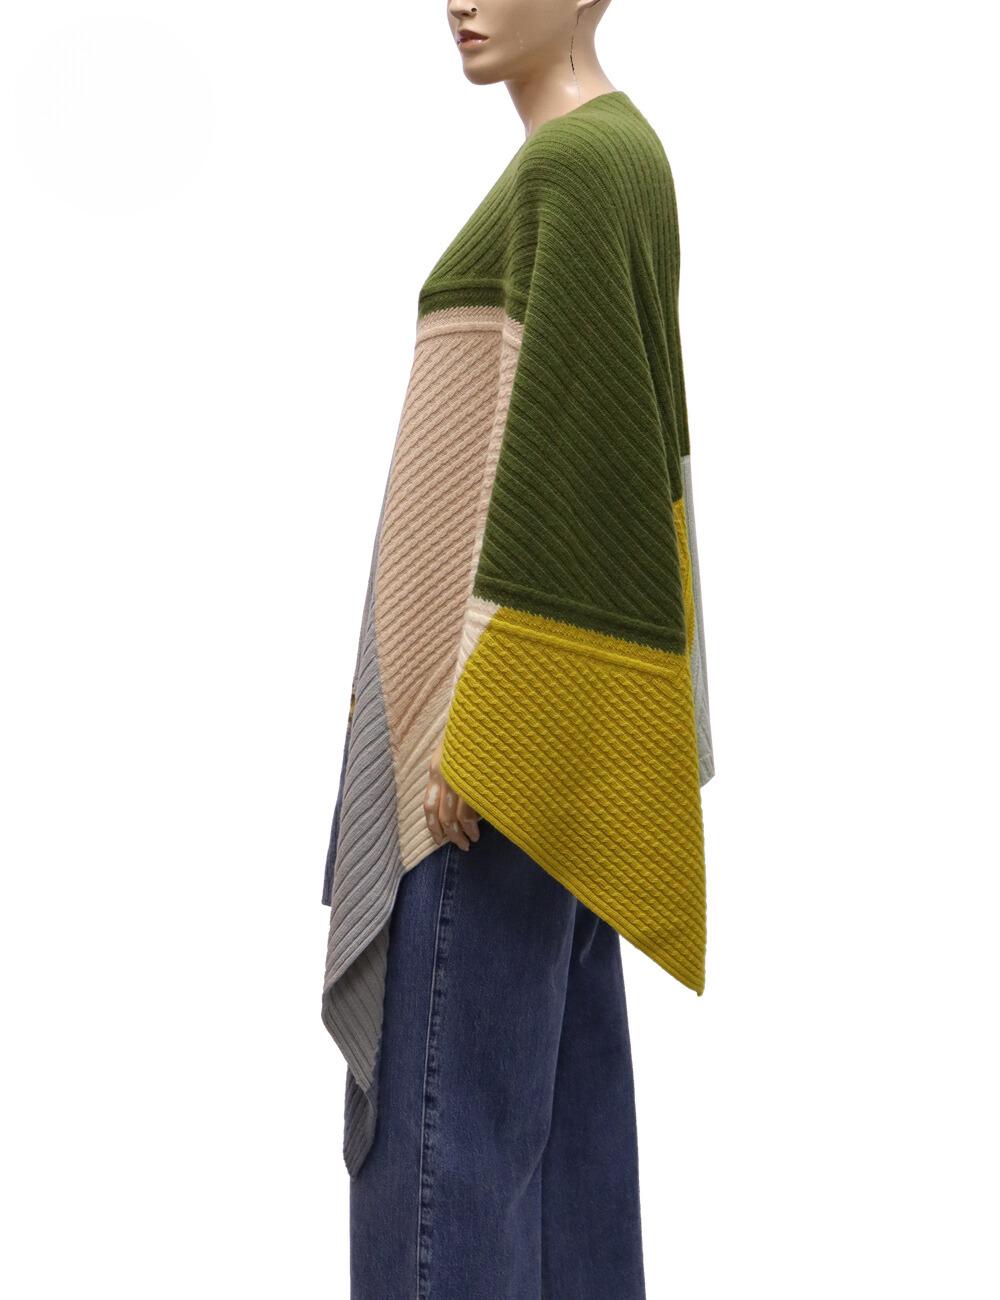 Missoni Cashmere Cape with Features Multi-worked Blocks.

Material: 100% Cashmere
Size: One Size
Overall Condition: Excellent